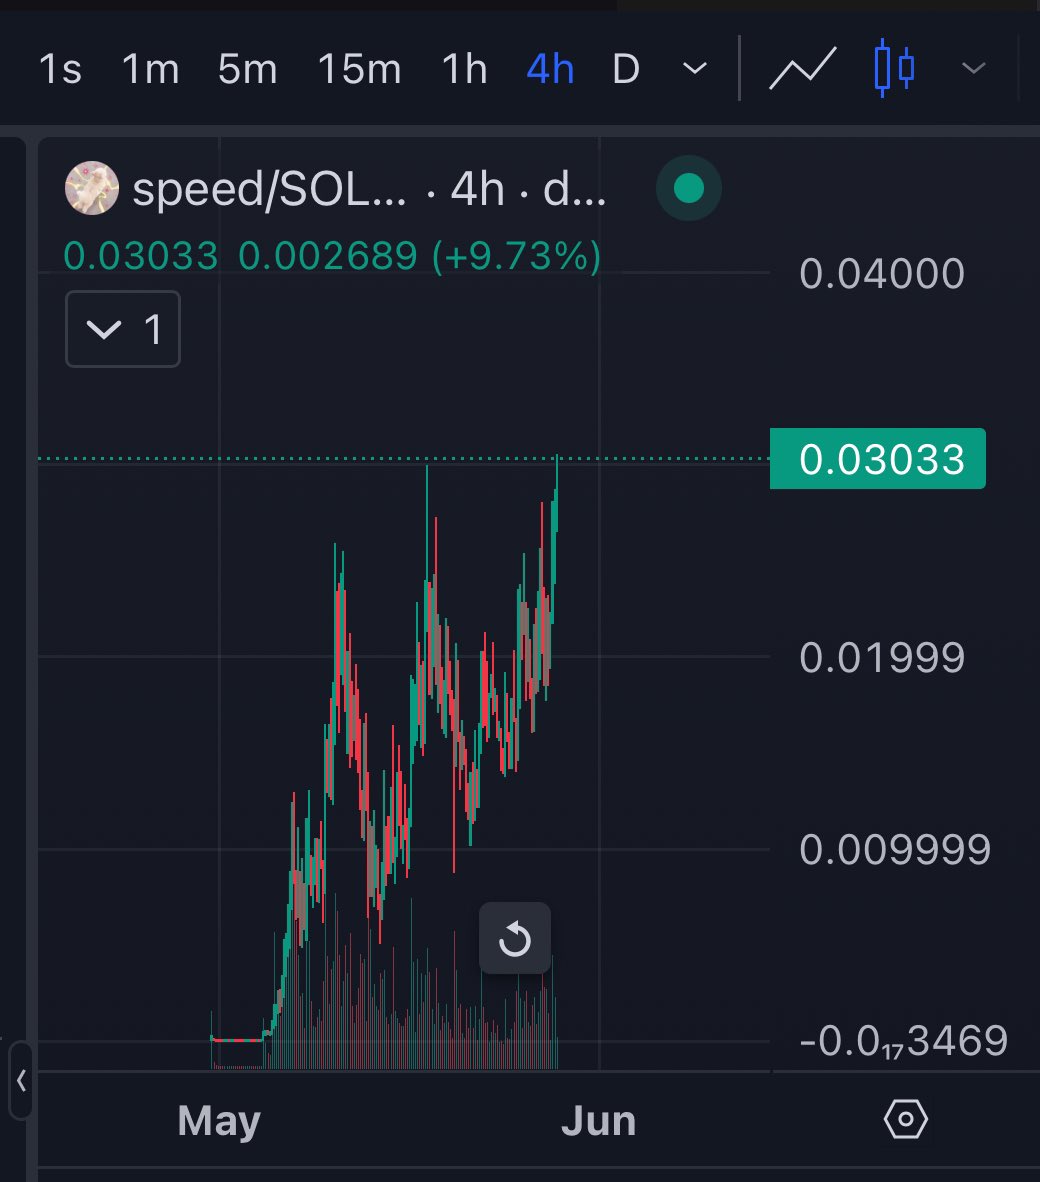 CONGRATULATIONS TO ALL MF’ERS THAT HELD.

EVERY SINGLE $SPEED BUYER IS IN PROFIT AS OF THIS MOMENT.

PRICE DISCOVERY INCOMING